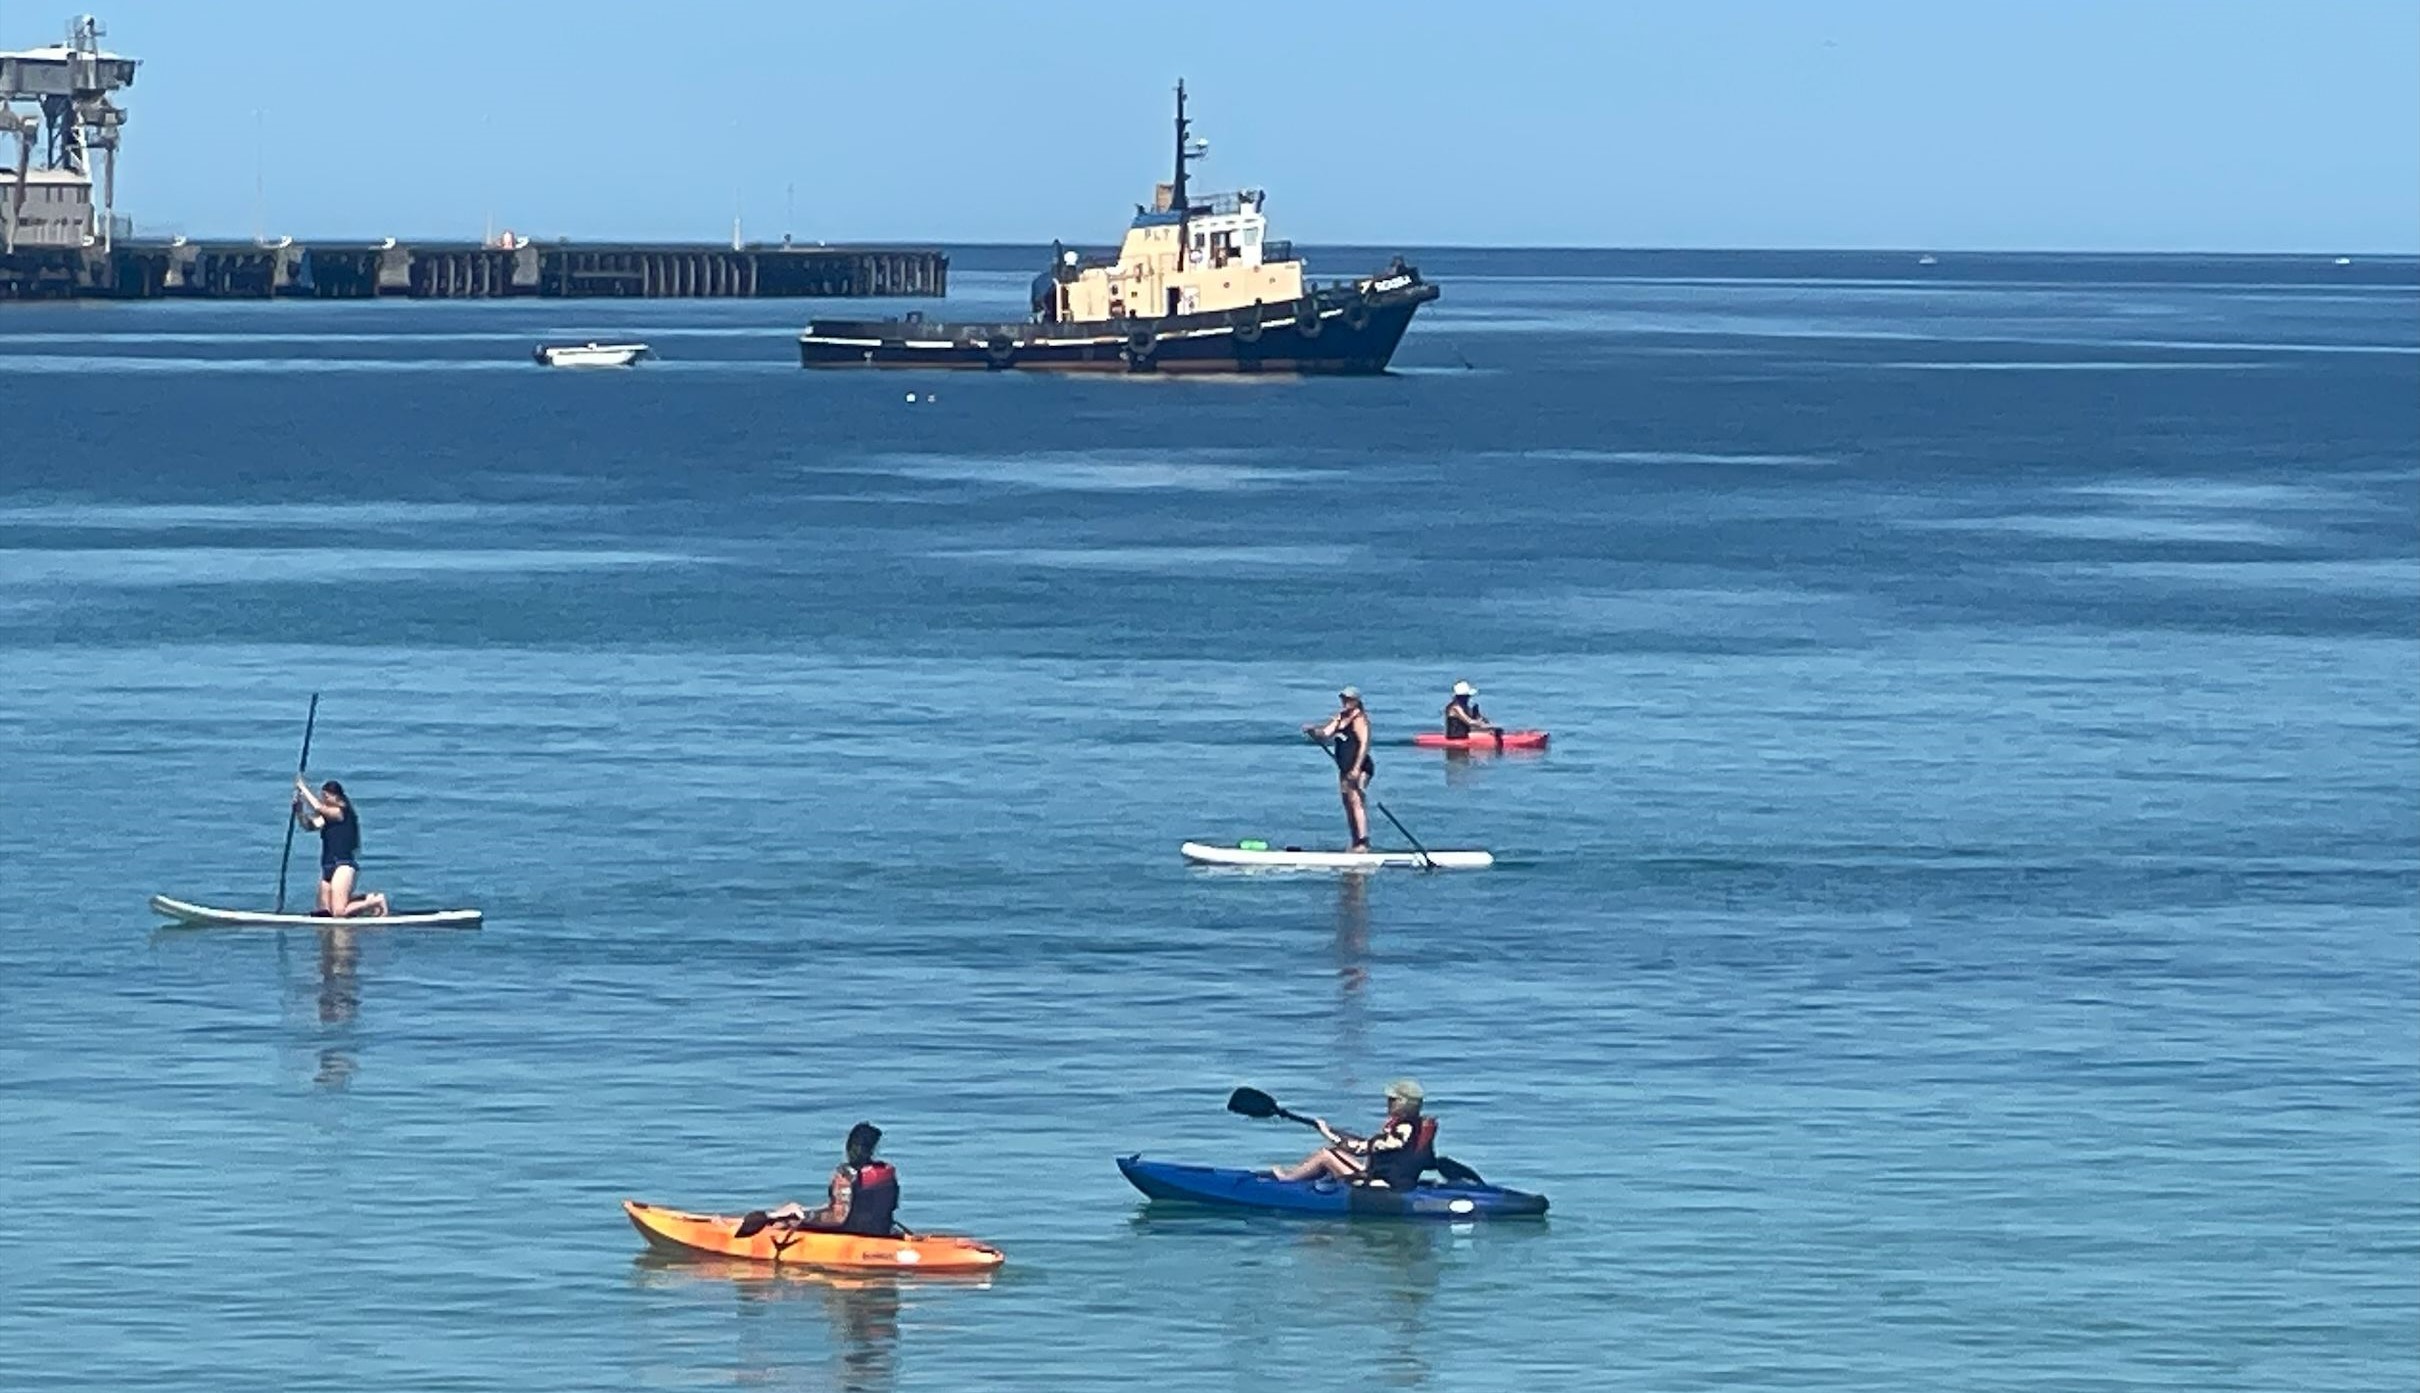 5 people on unpowered craft on water at Wallaroo with a tug boat and boat in the background